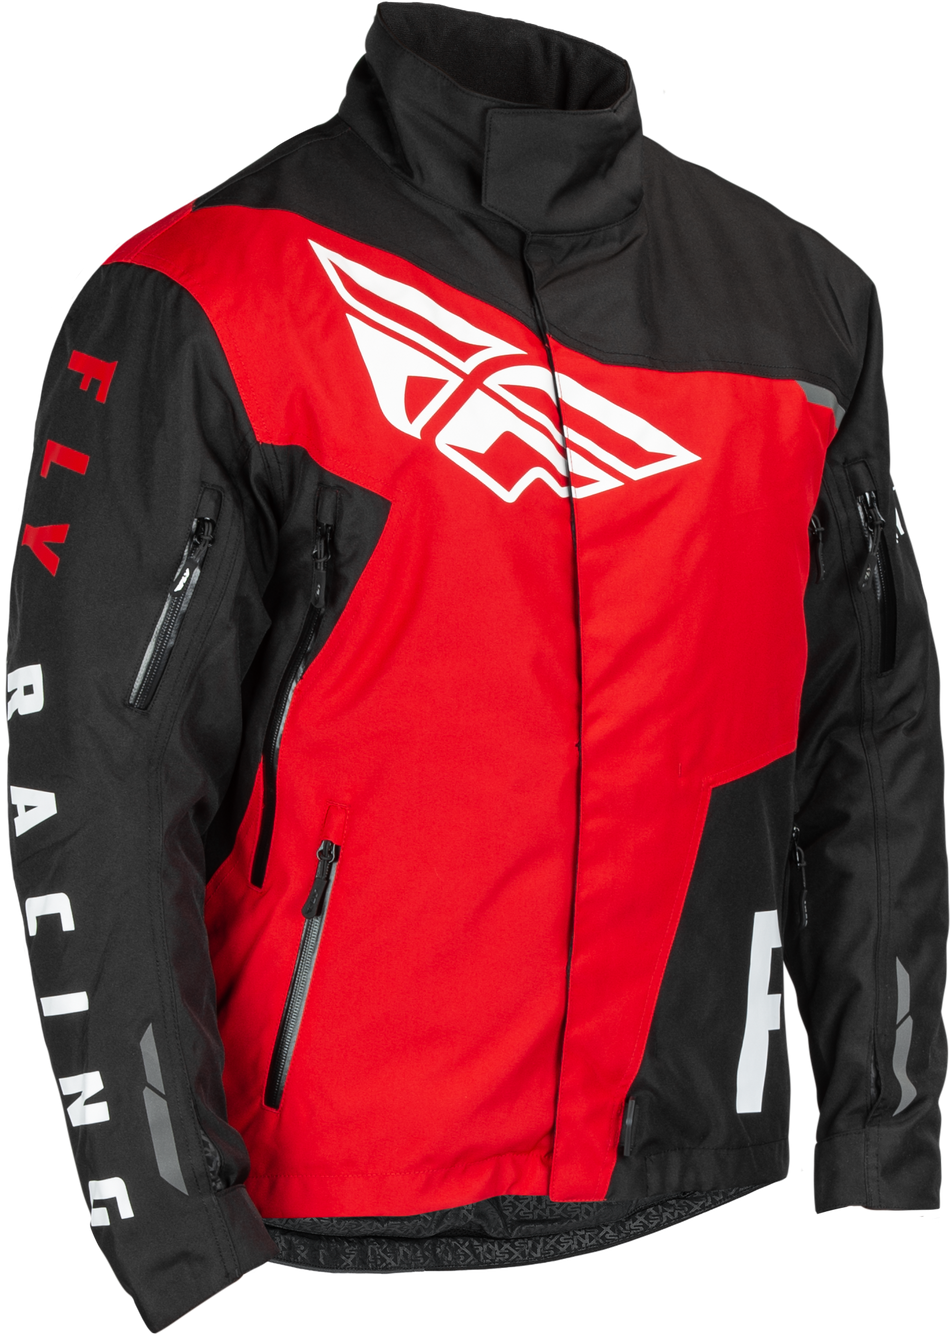 FLY RACING Snx Pro Jacket Black/Red Sm 470-5402S